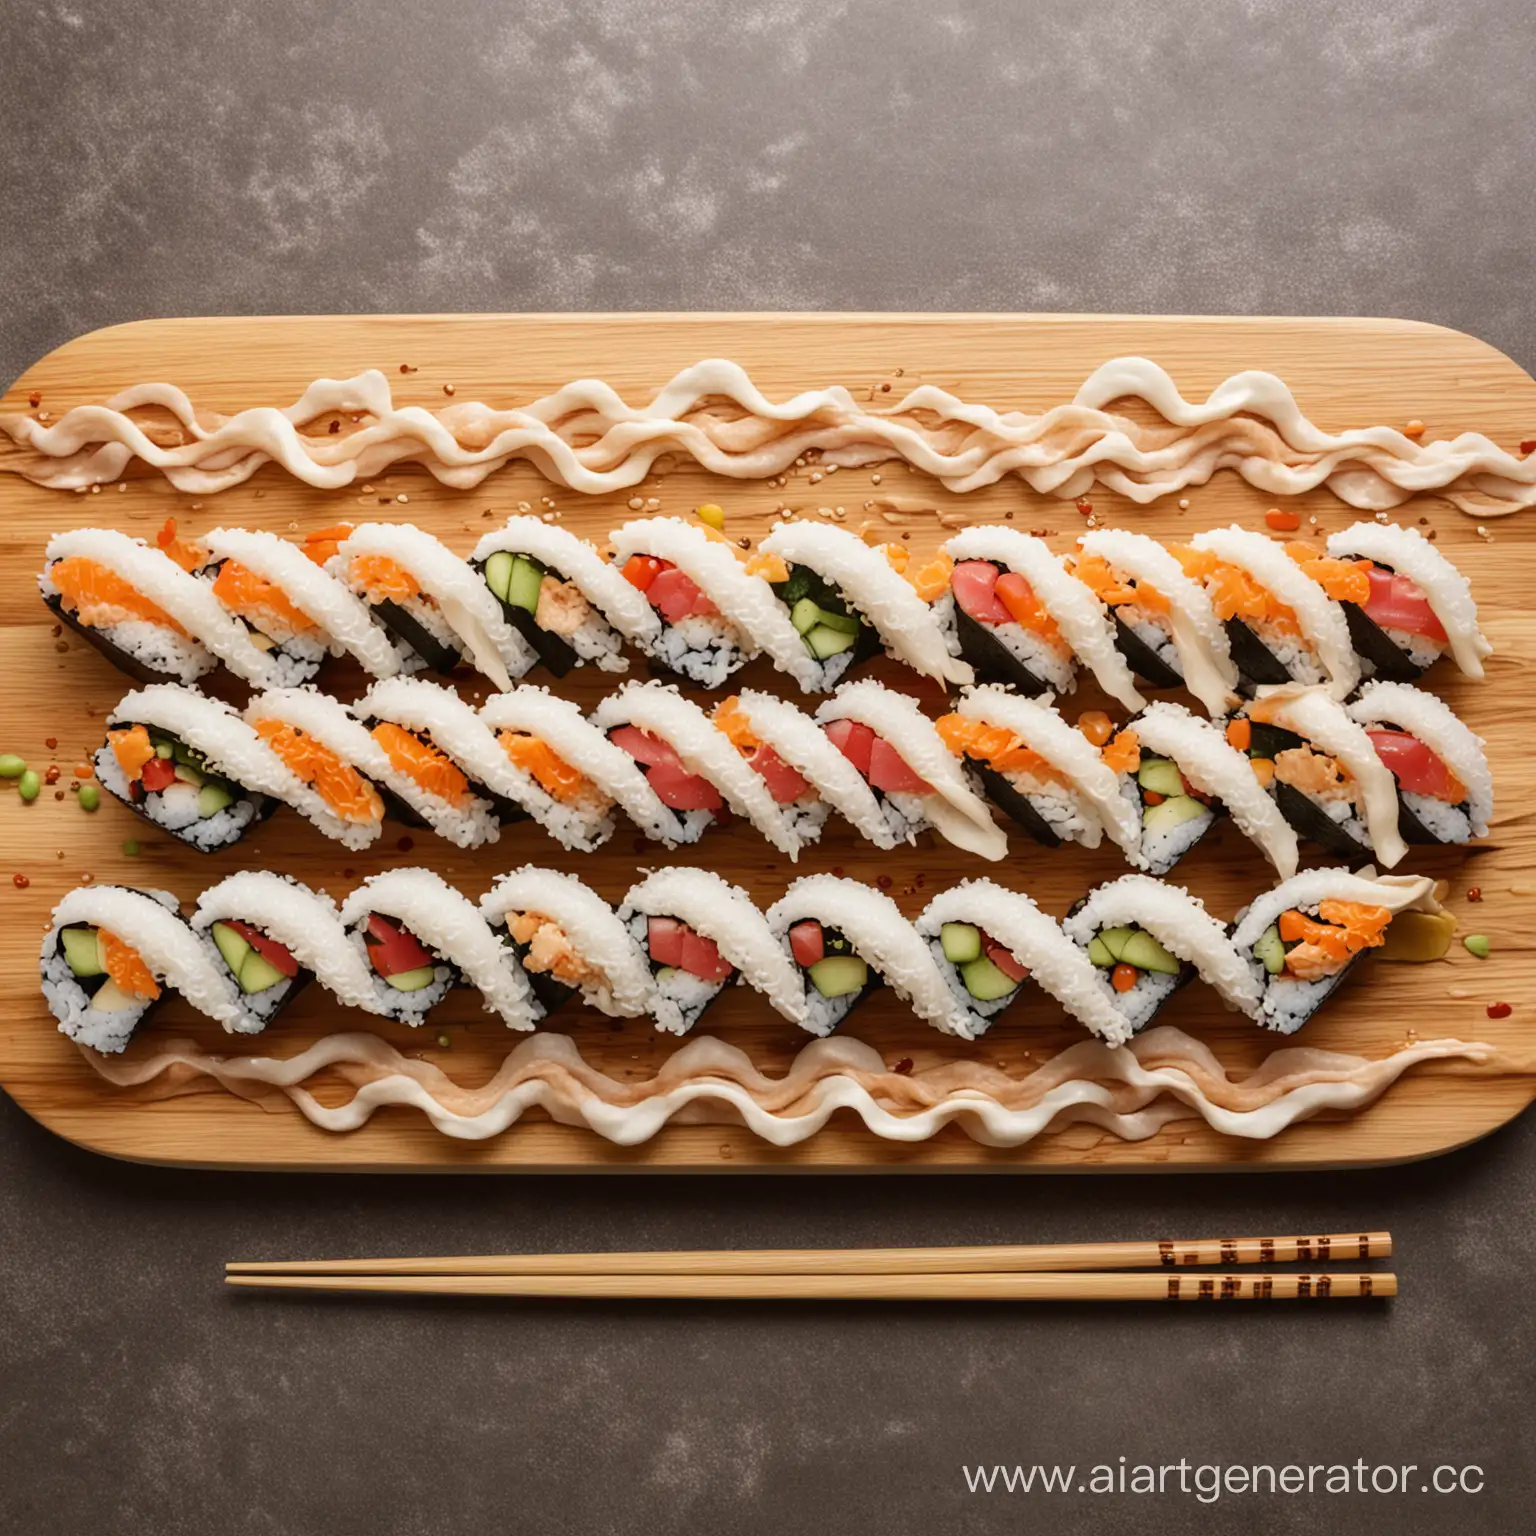 Colorful-Sushi-Rolls-with-Sine-and-Cosine-Waves-Vibrant-Display-at-Japanese-Restaurant